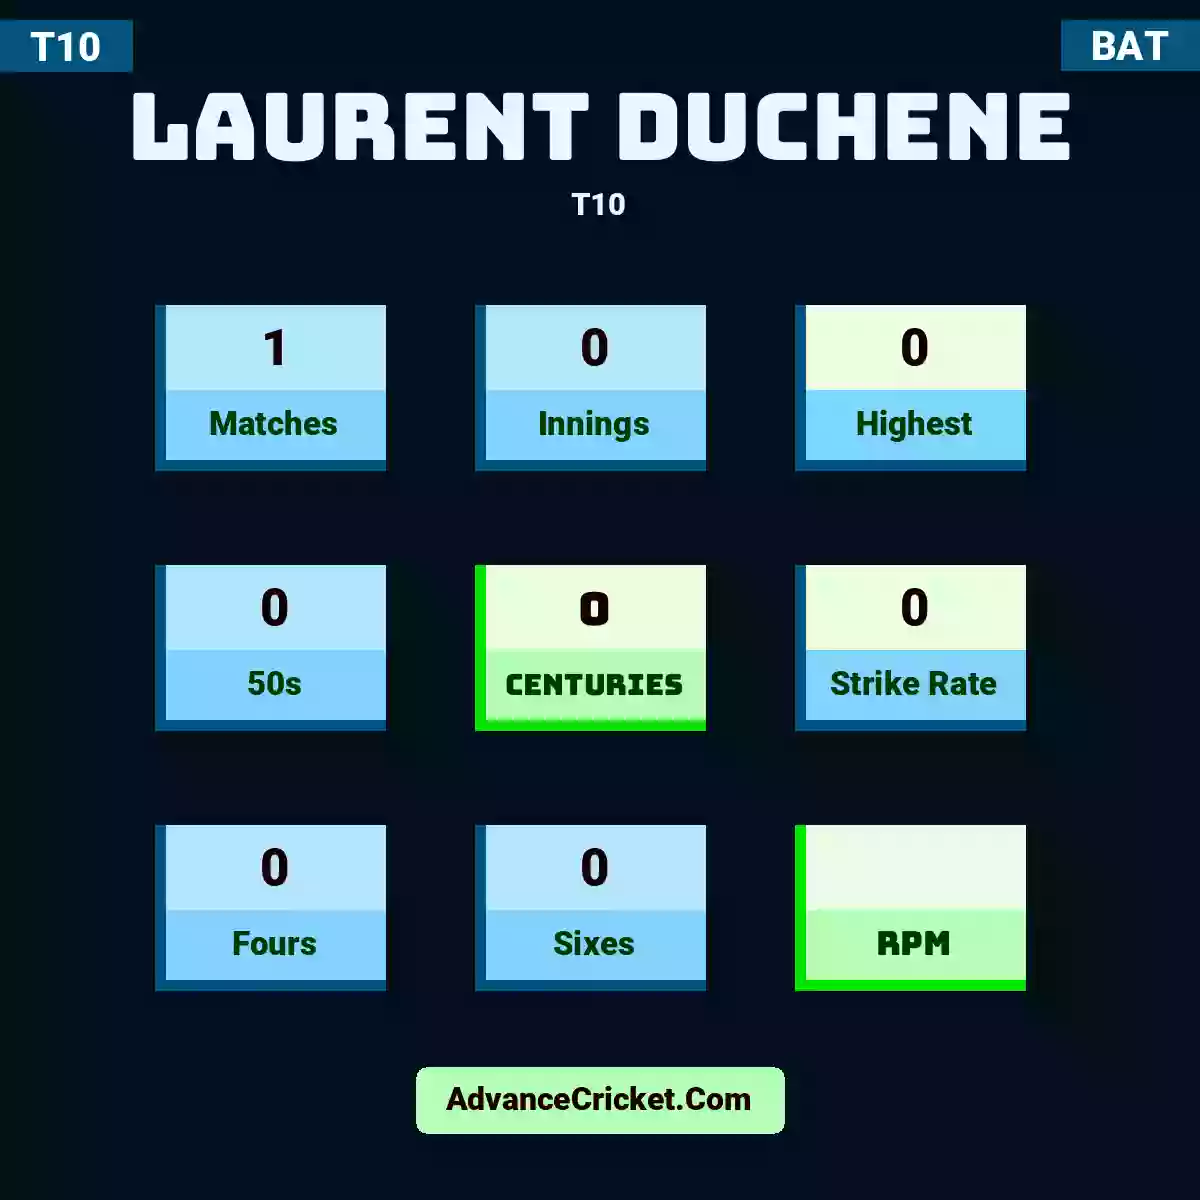 Laurent duchene T10 , Laurent duchene played 1 matches, scored 0 runs as highest, 0 half-centuries, and 0 centuries, with a strike rate of 0. L.duchene hit 0 fours and 0 sixes.